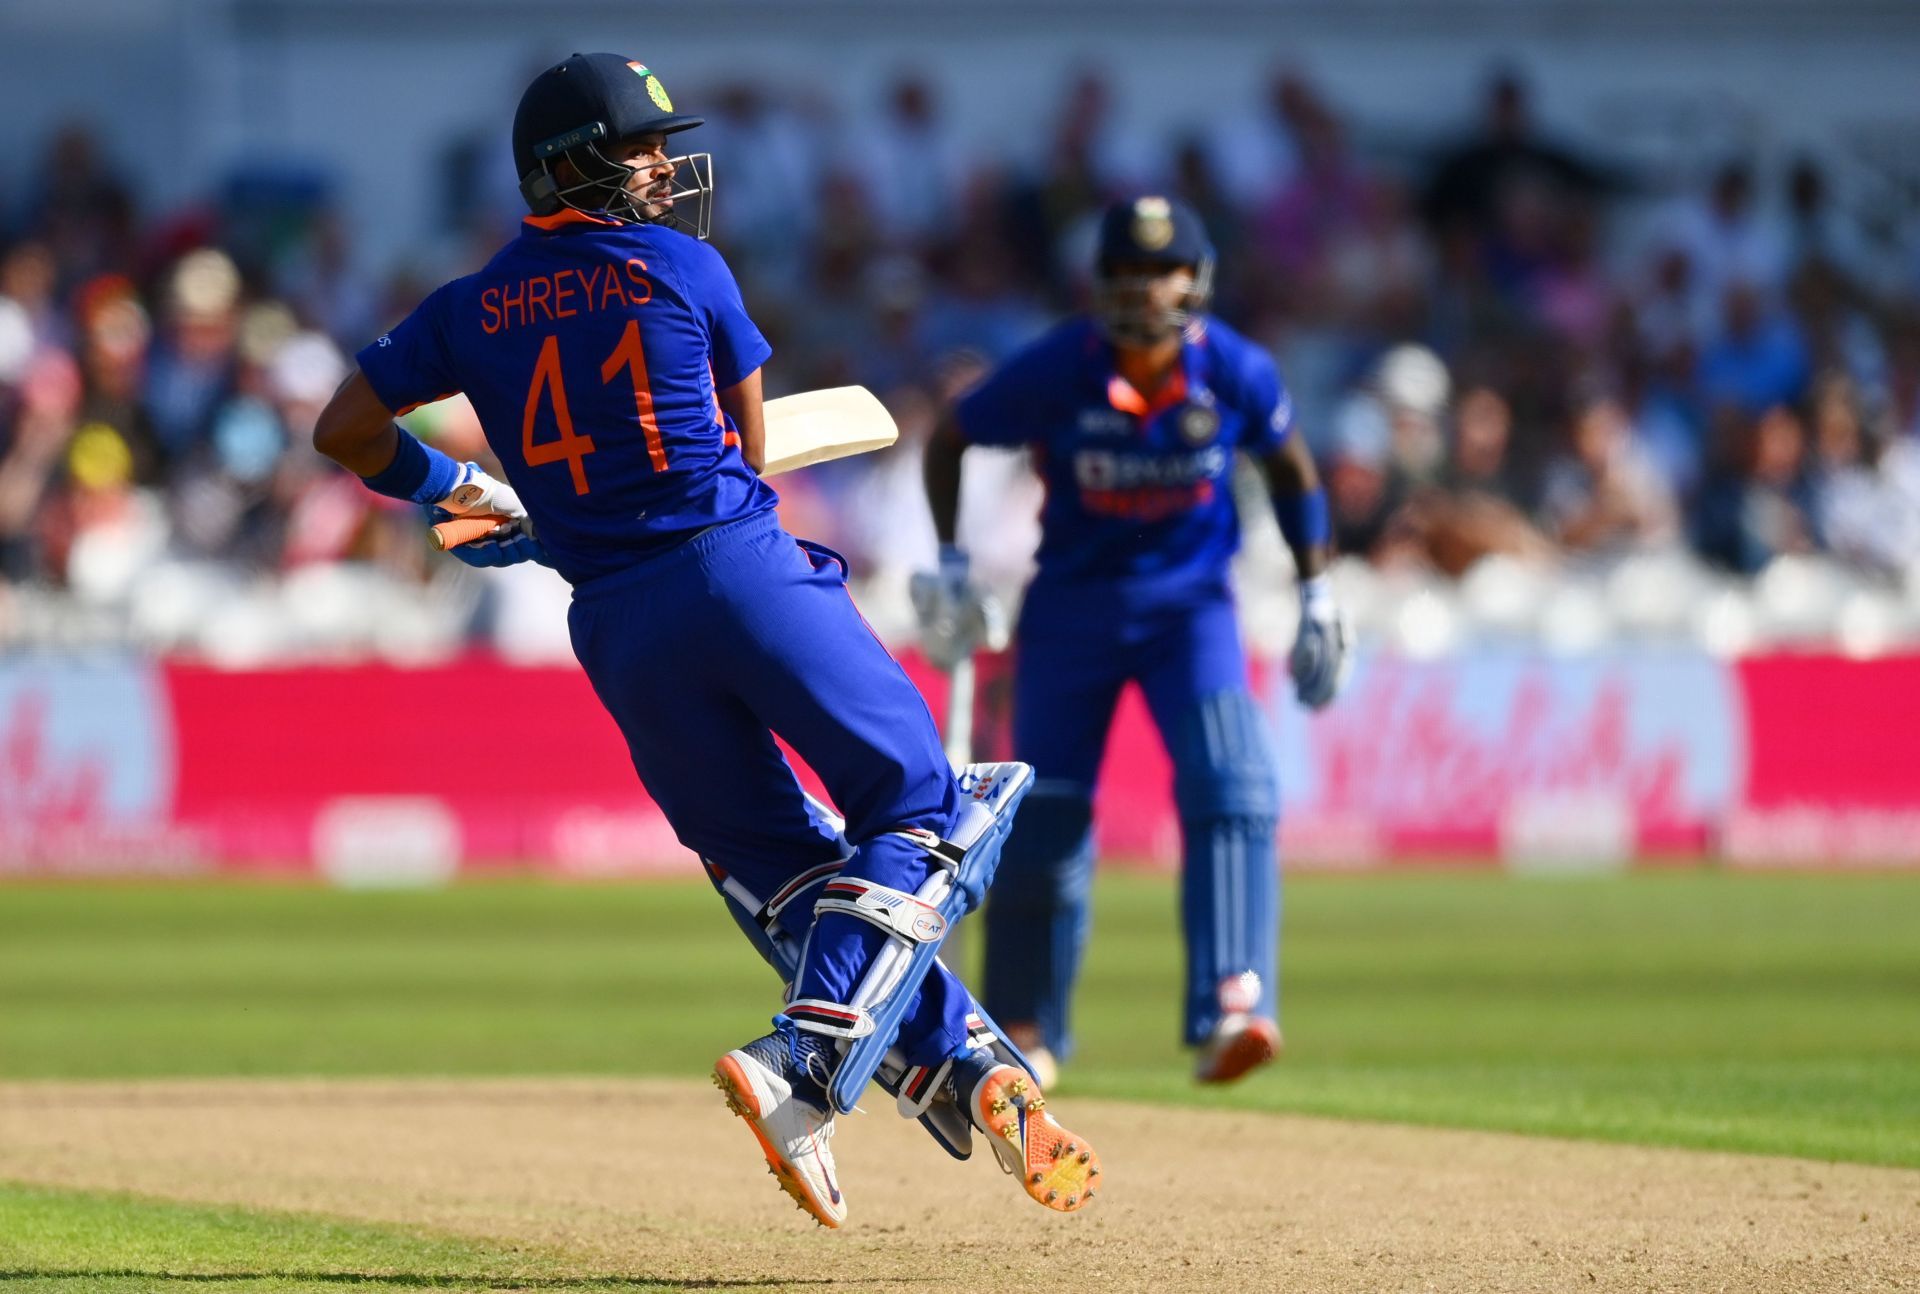 Shreyas Iyer struggled to accelerate in the third T20I against England